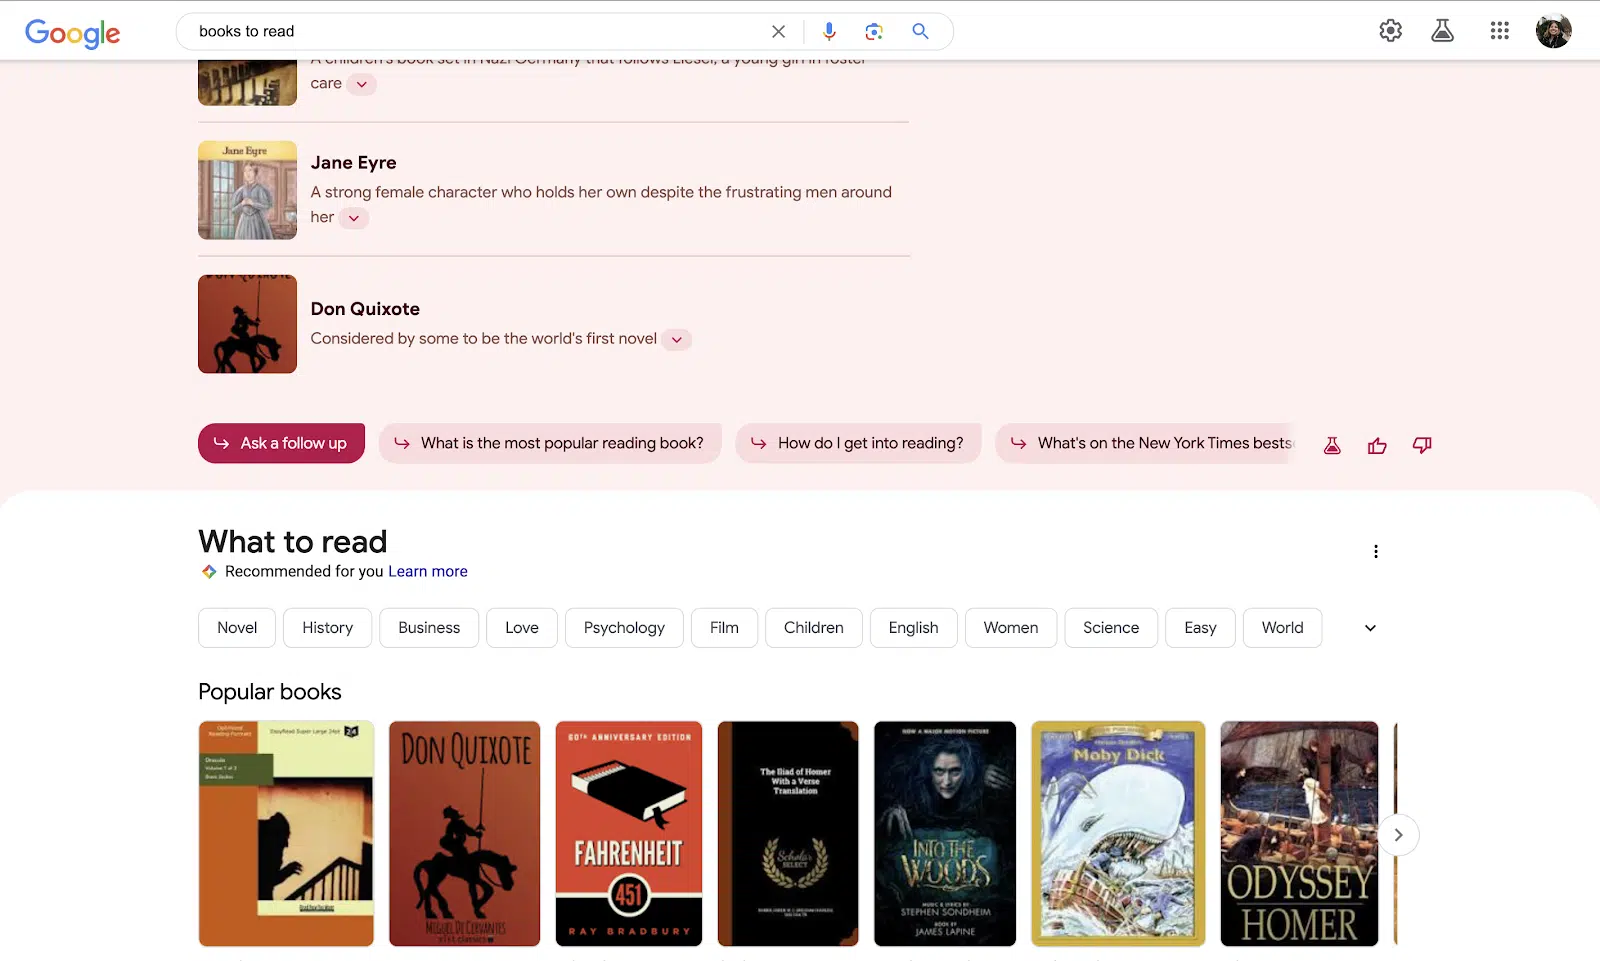 This search shows book covers and titles within SGE right above a large featured card with.... the same book covers and titles.